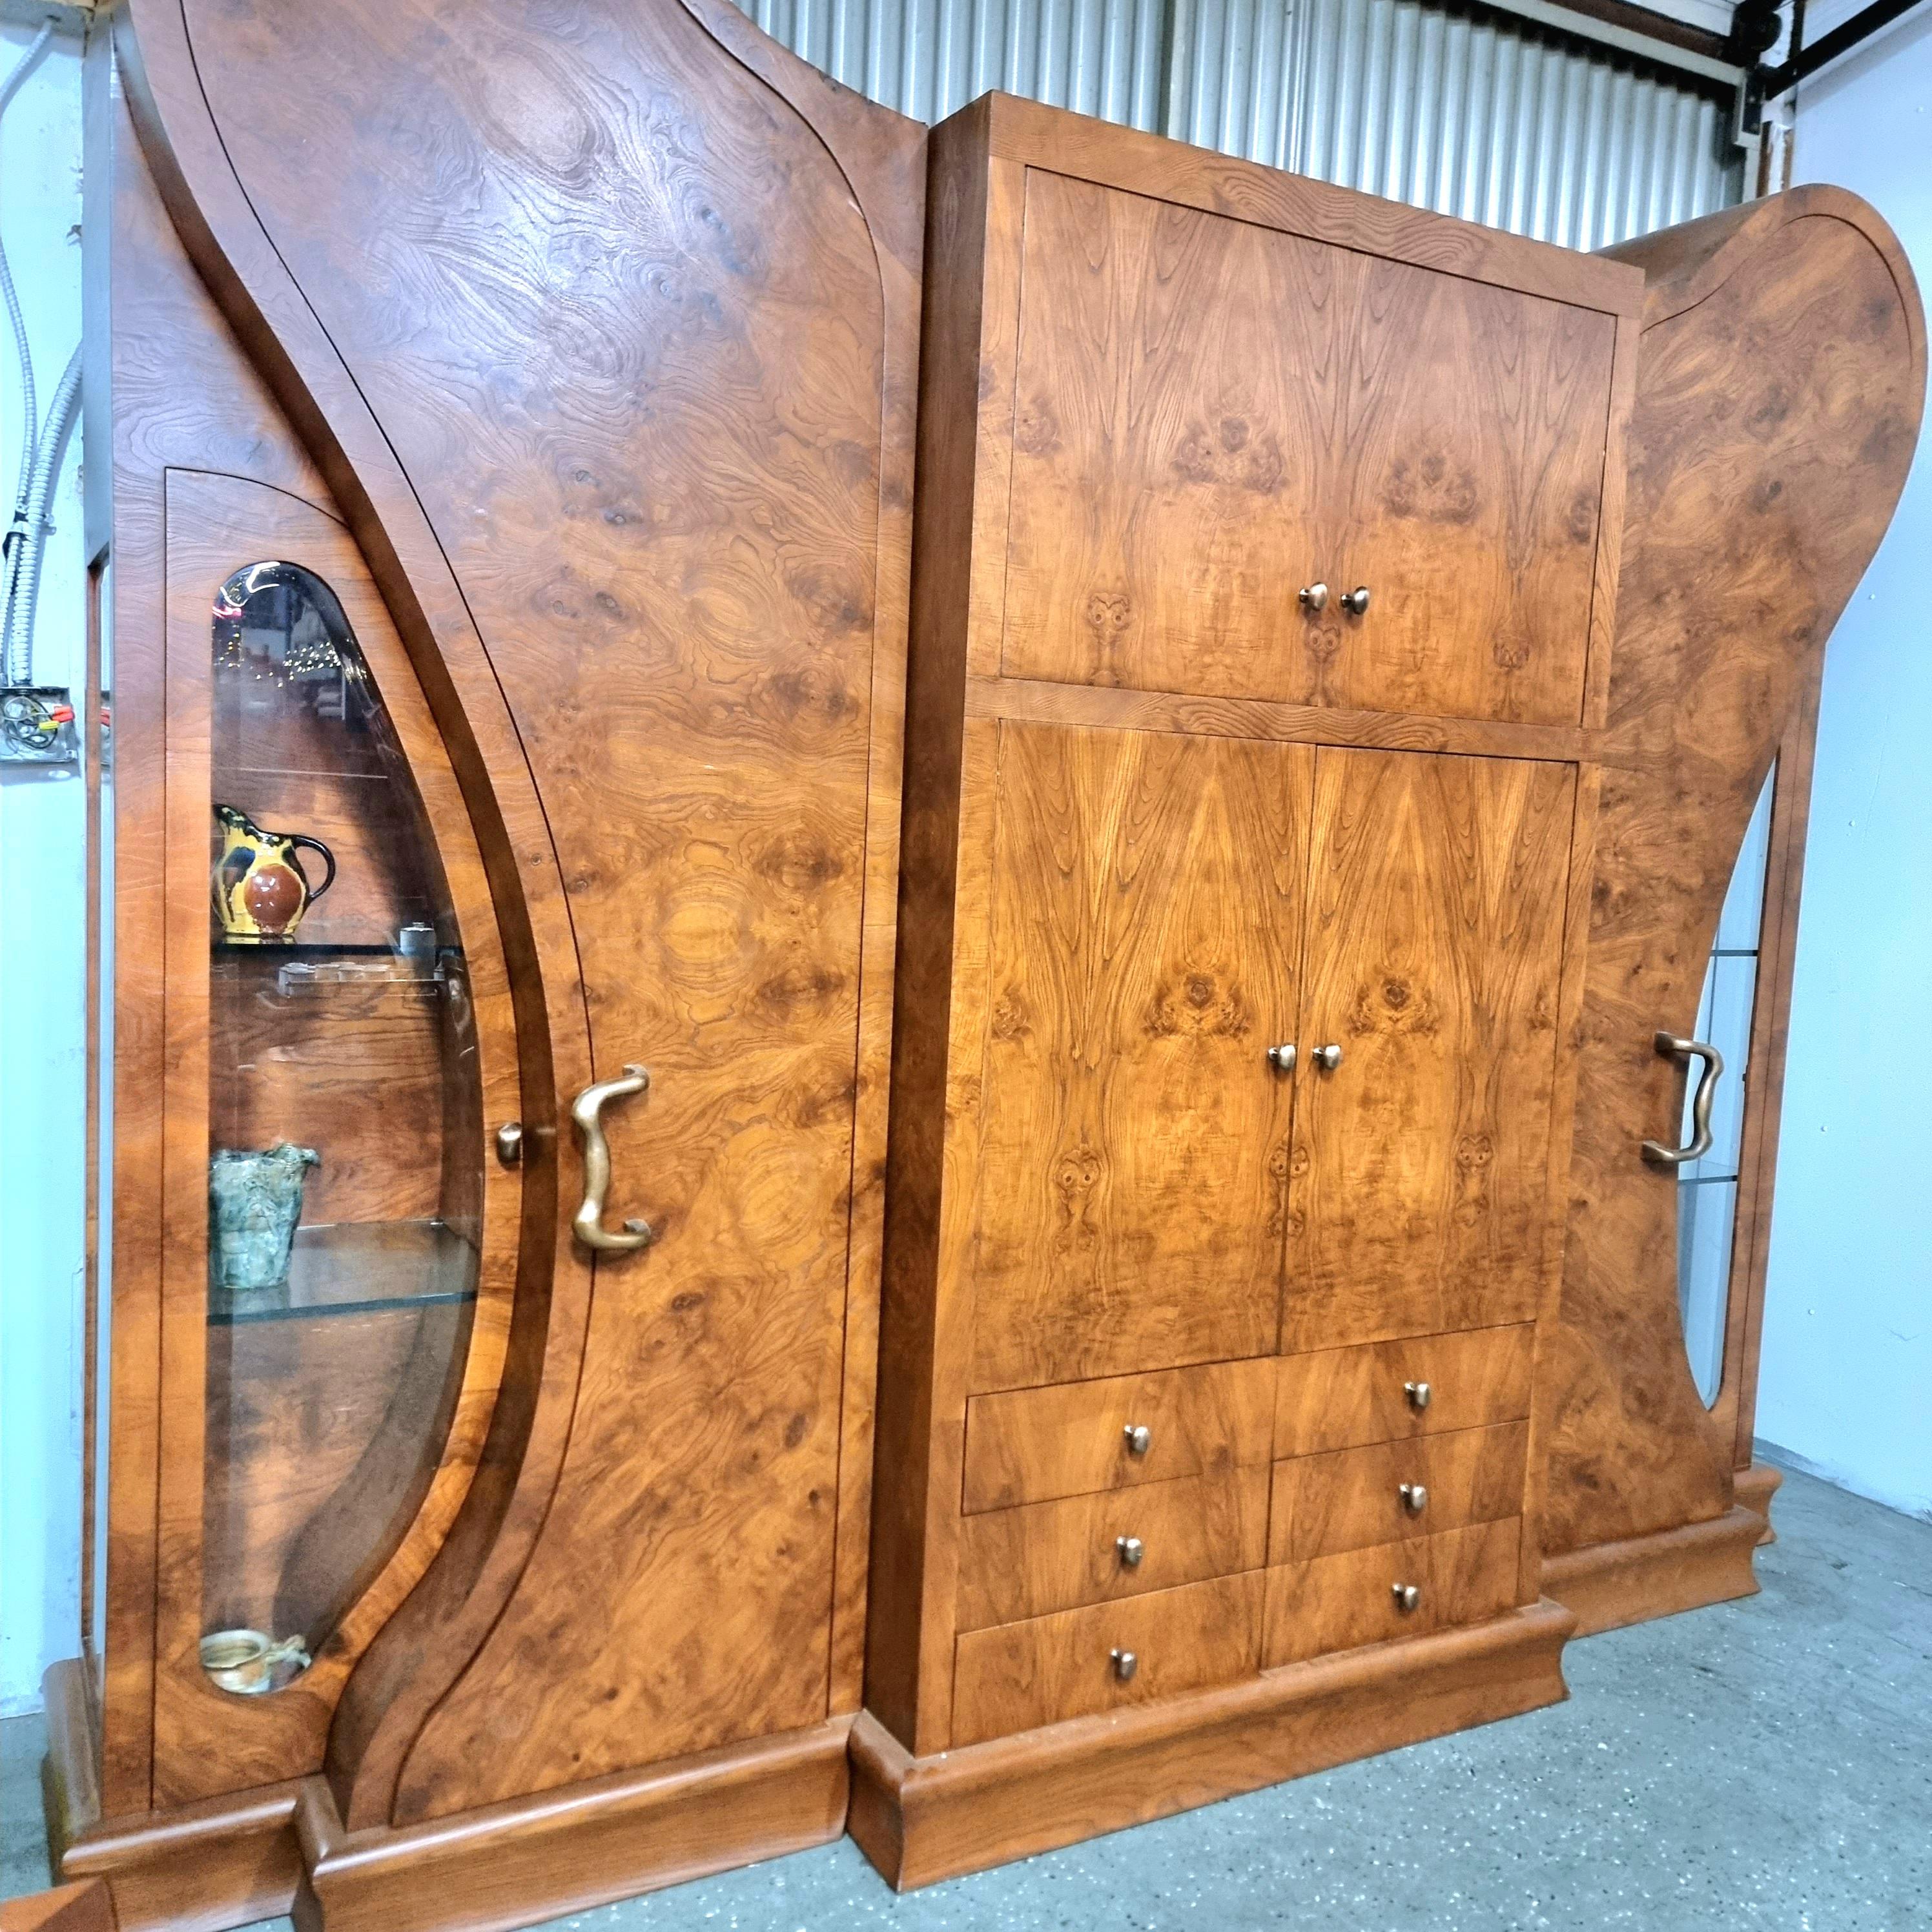 
A unique, one of a kind, original burl wood wall unit/ entertainment center. This unique piece is of the highest quality. It features gorgeous burl wood doors, 2 glass side panels that display with 2 adjustable glass shelves, and in the center 2